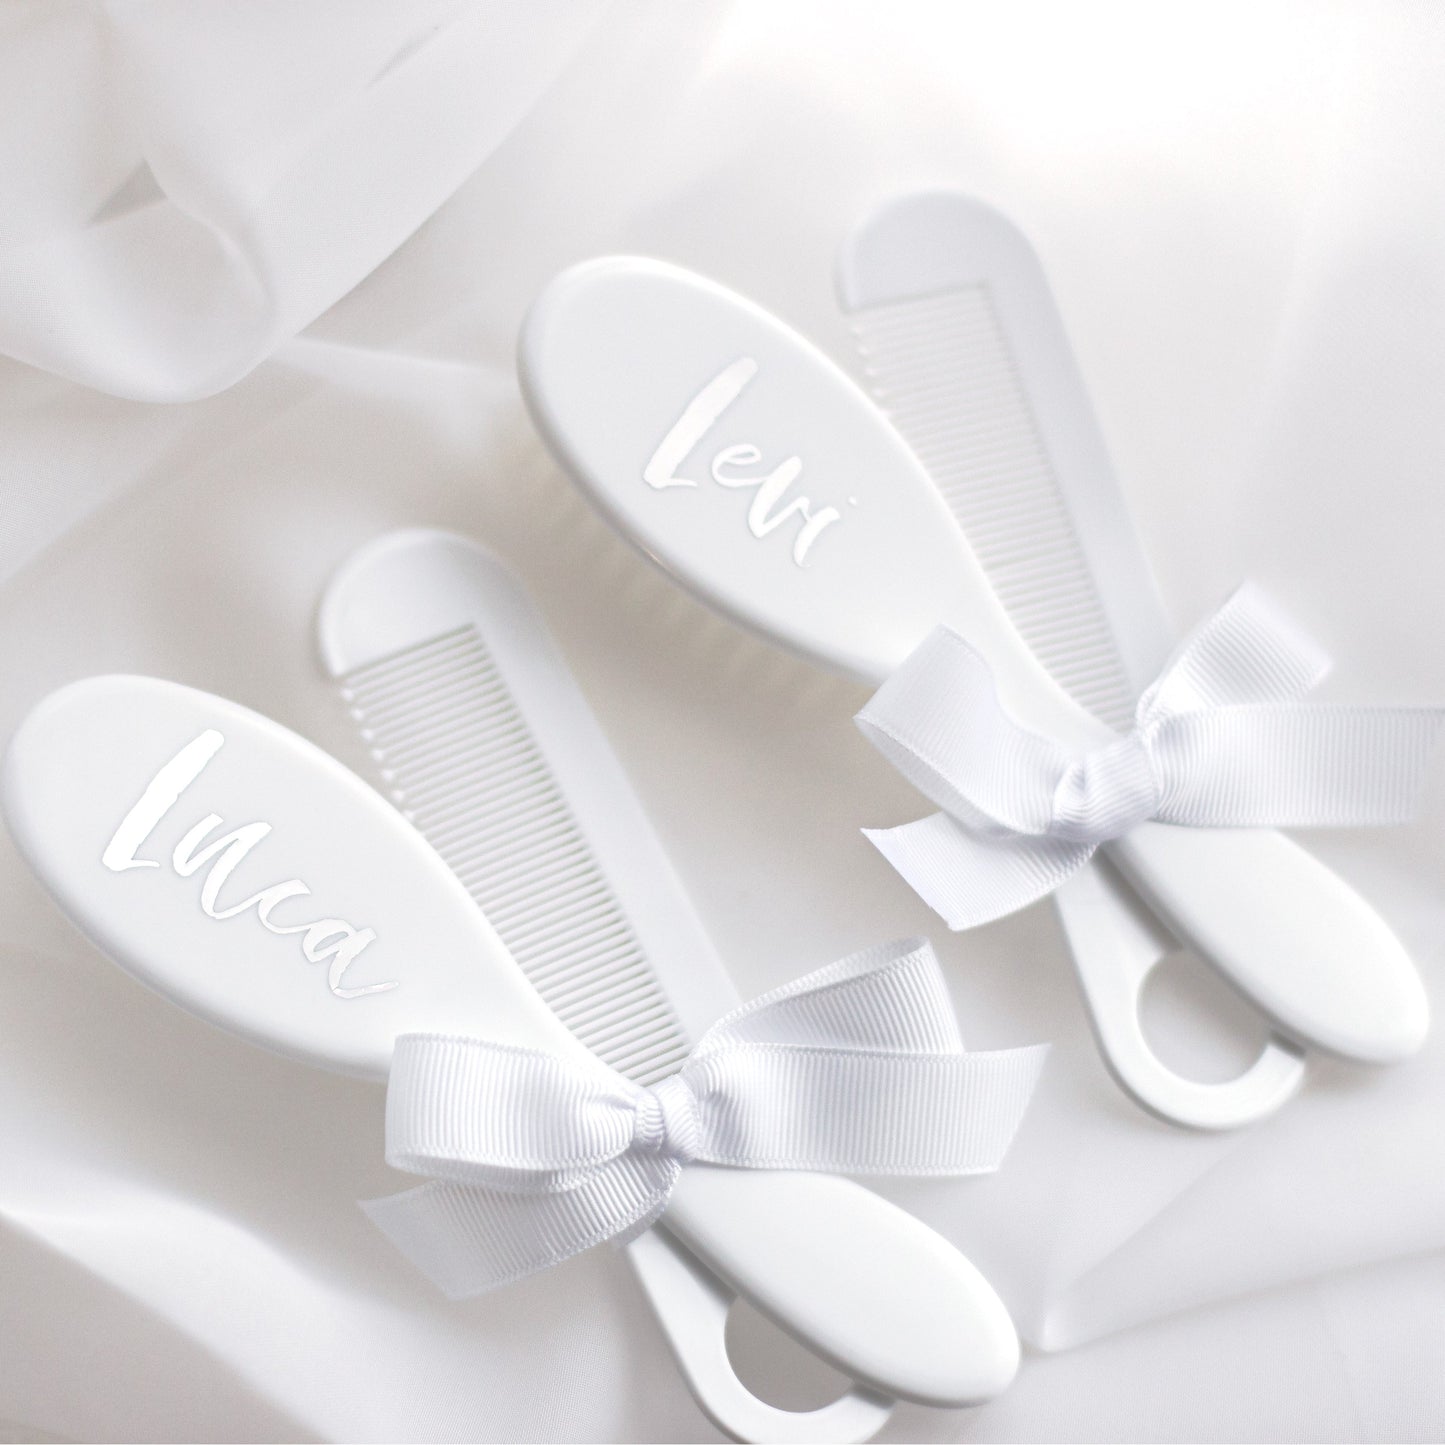 White Personalised Brush & Comb Set - The brush can personalised on the back with the child's name or initials. The brush is intended for babies and has soft bristles.